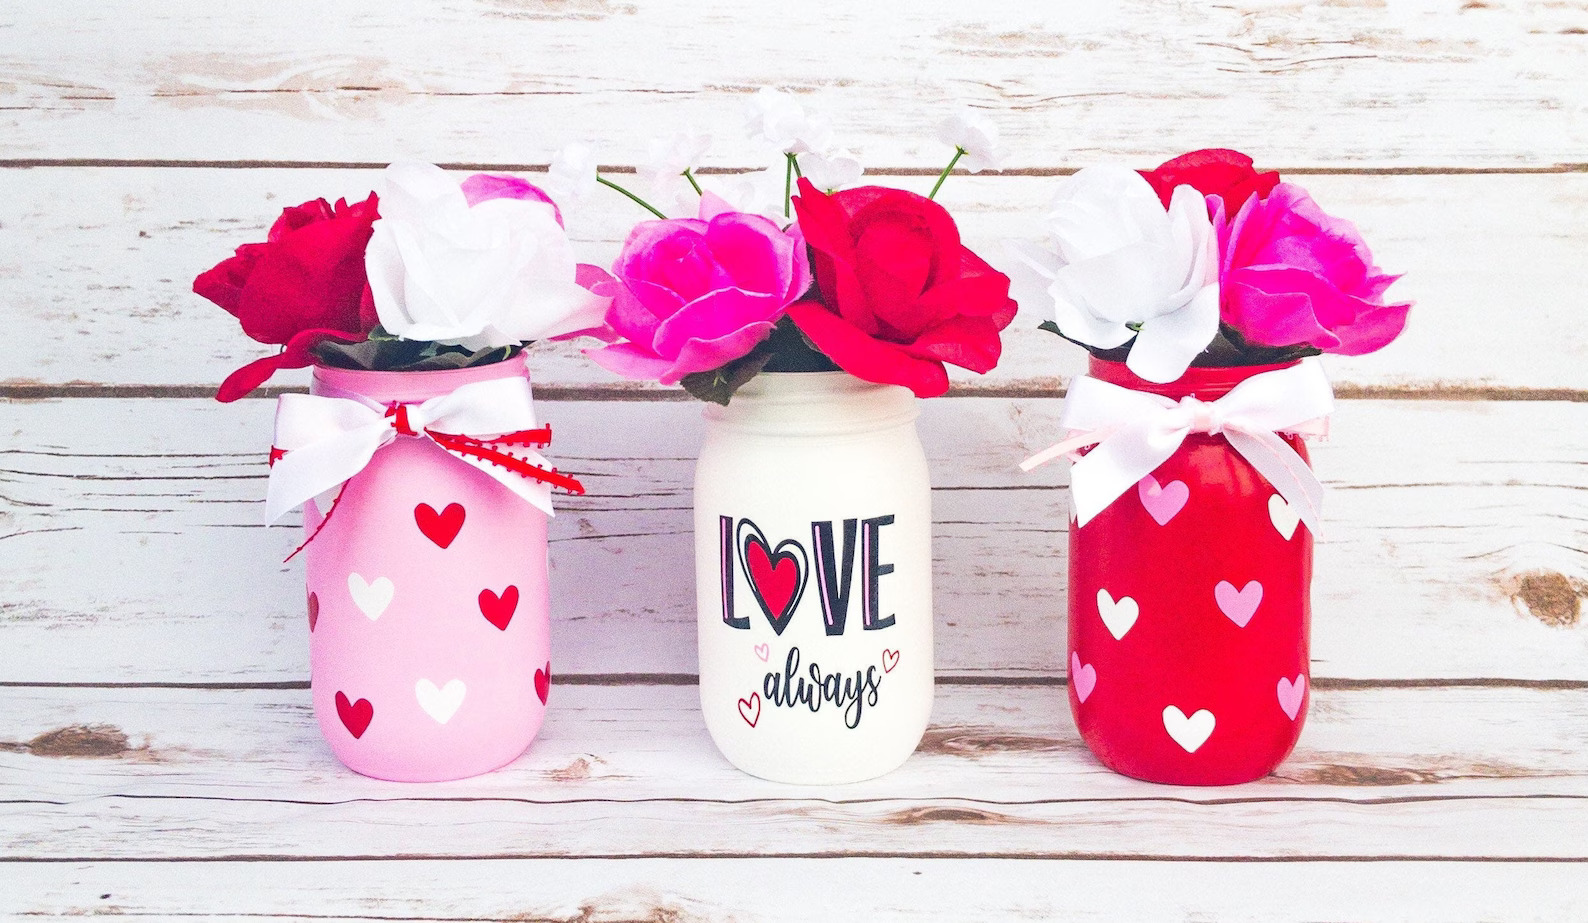 16 Lovely Valentine's Day Centerpiece Ideas That Will Melt Your Heart